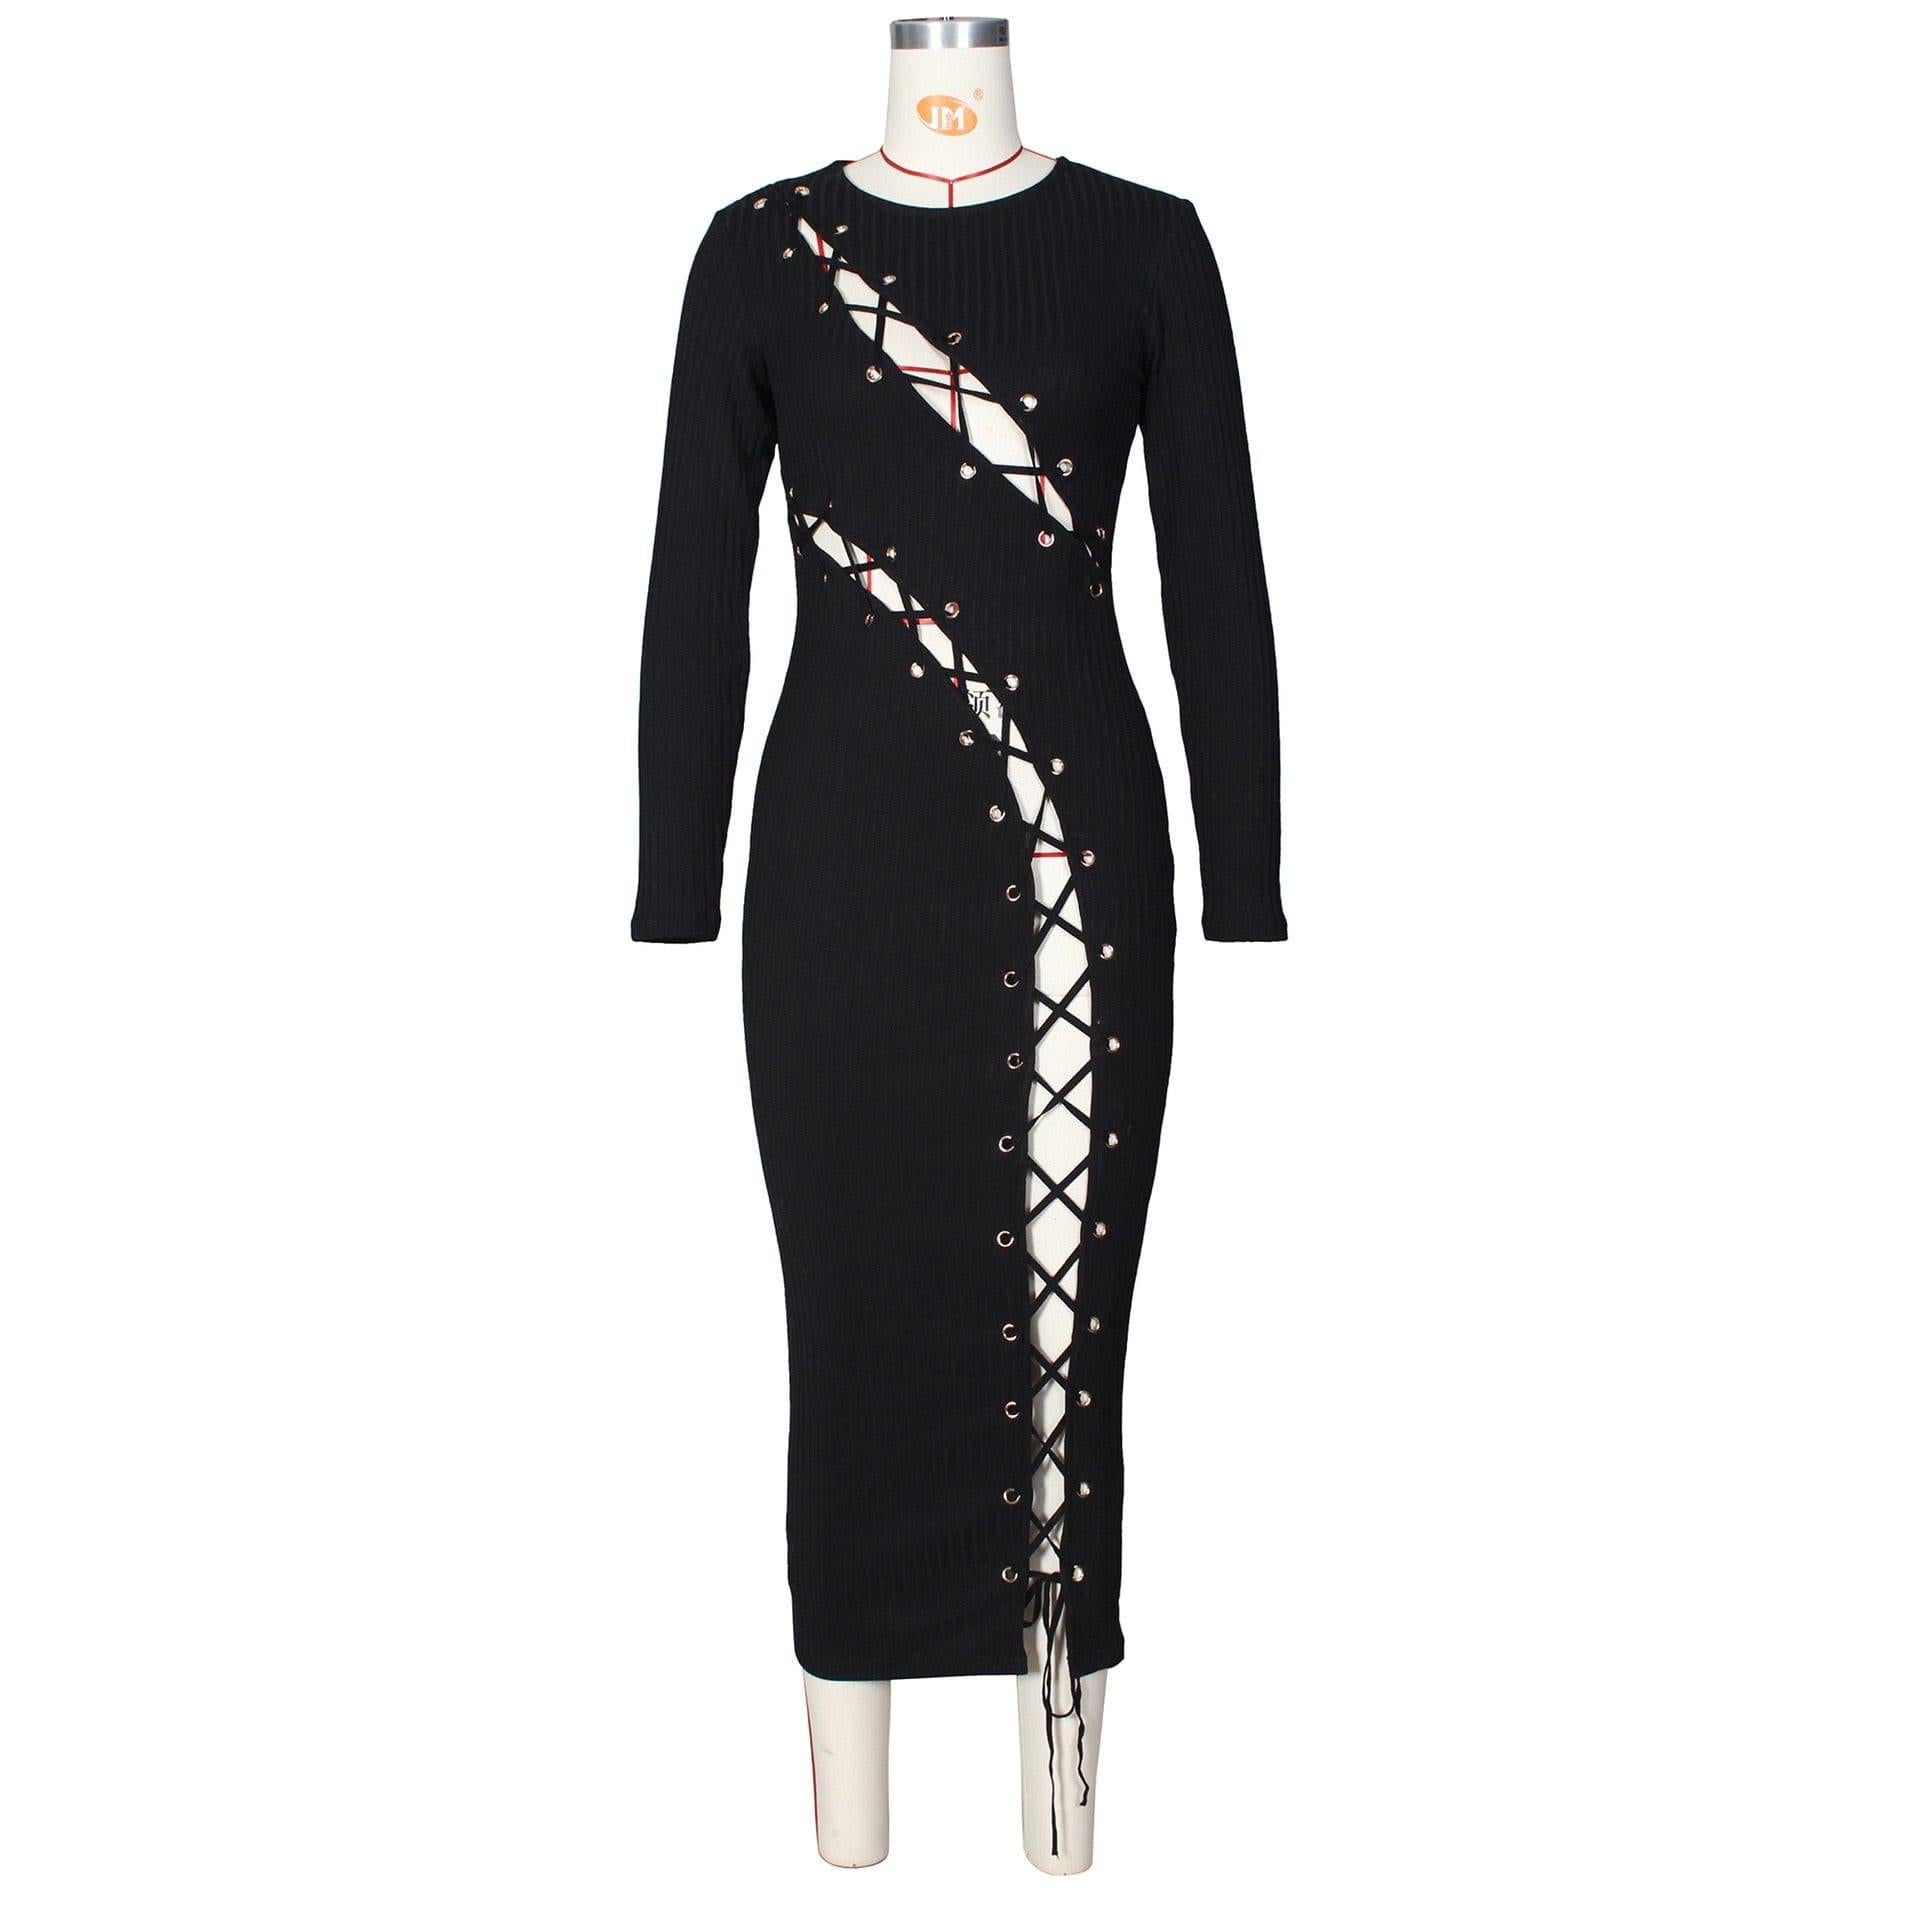 Knitted Lace Up Sexy Maxi Dress - For Women USA